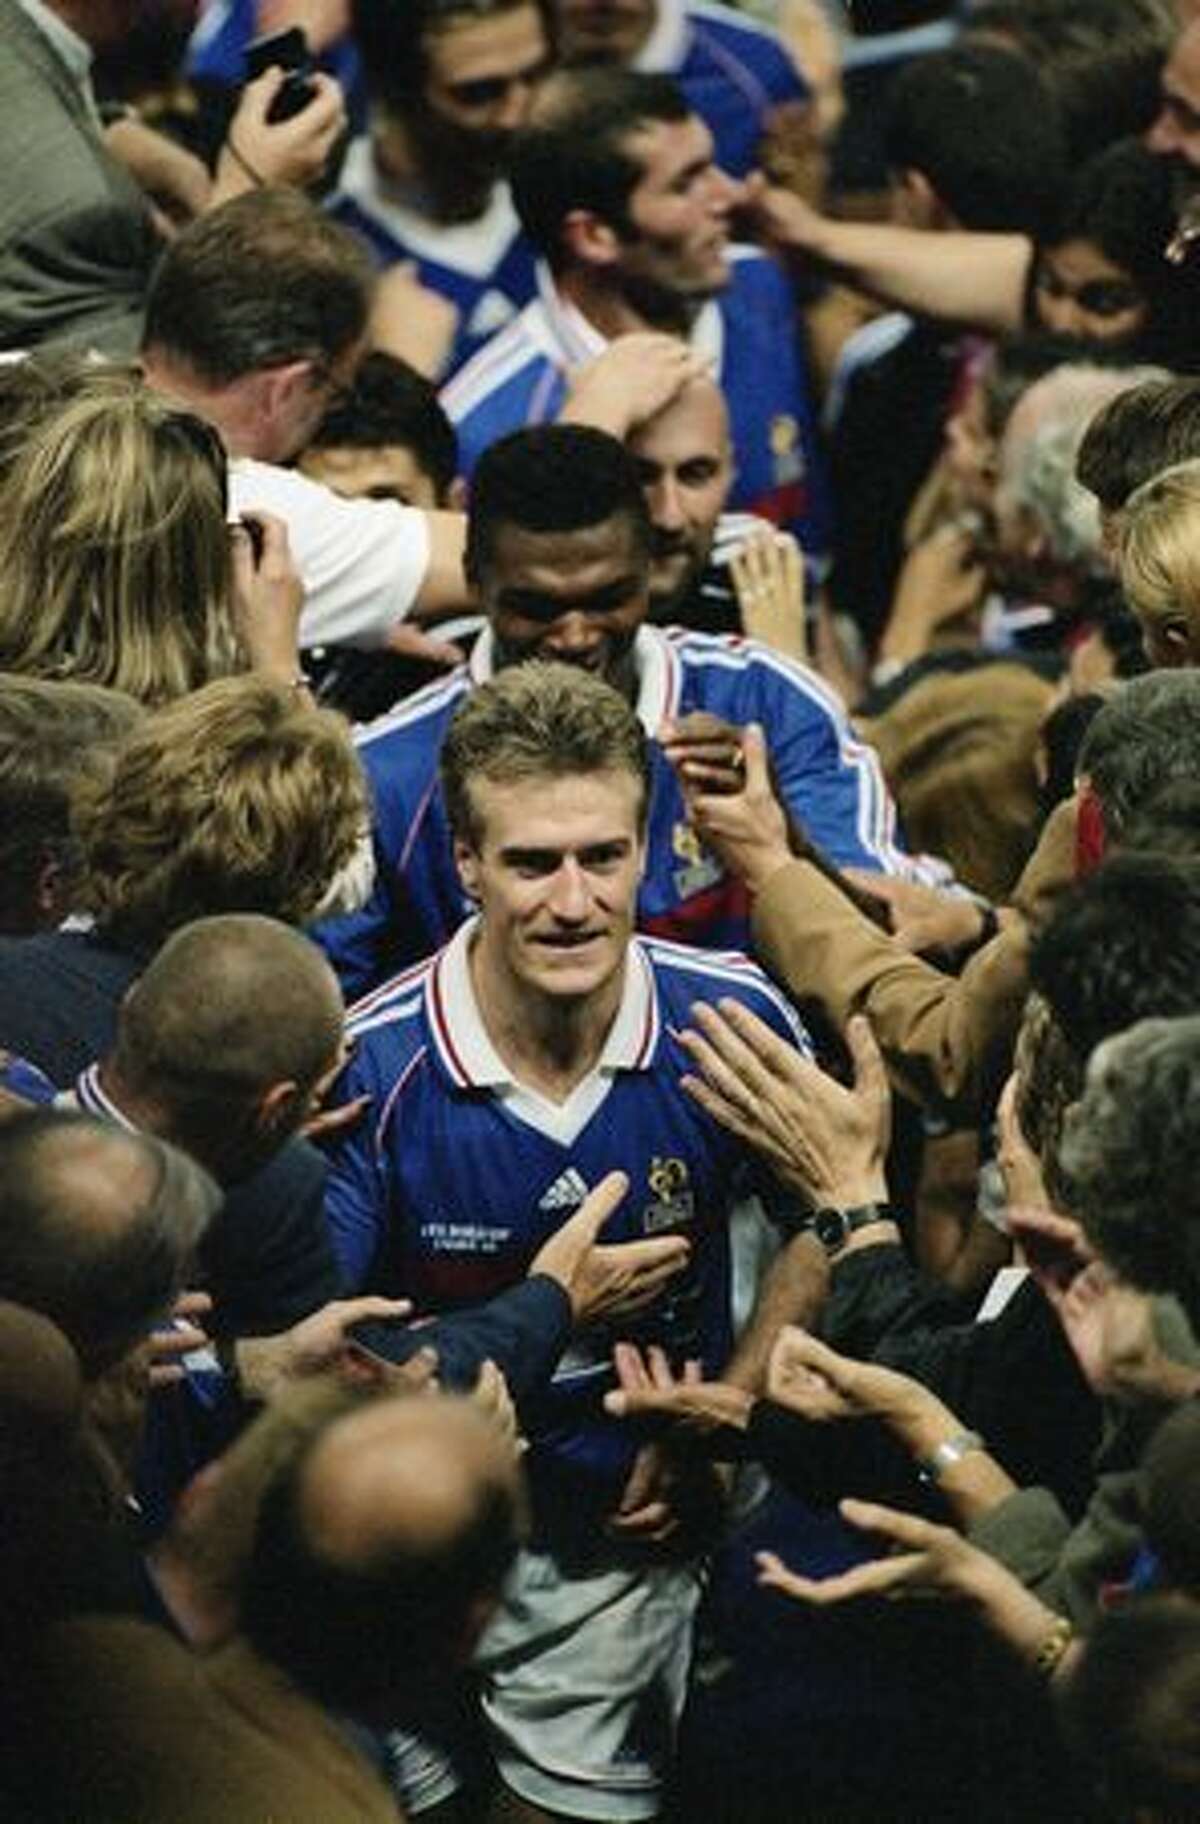 1998: France captain Didier Deschamps leads his team up to the presentation box after victory in the World Cup final against Brazil.